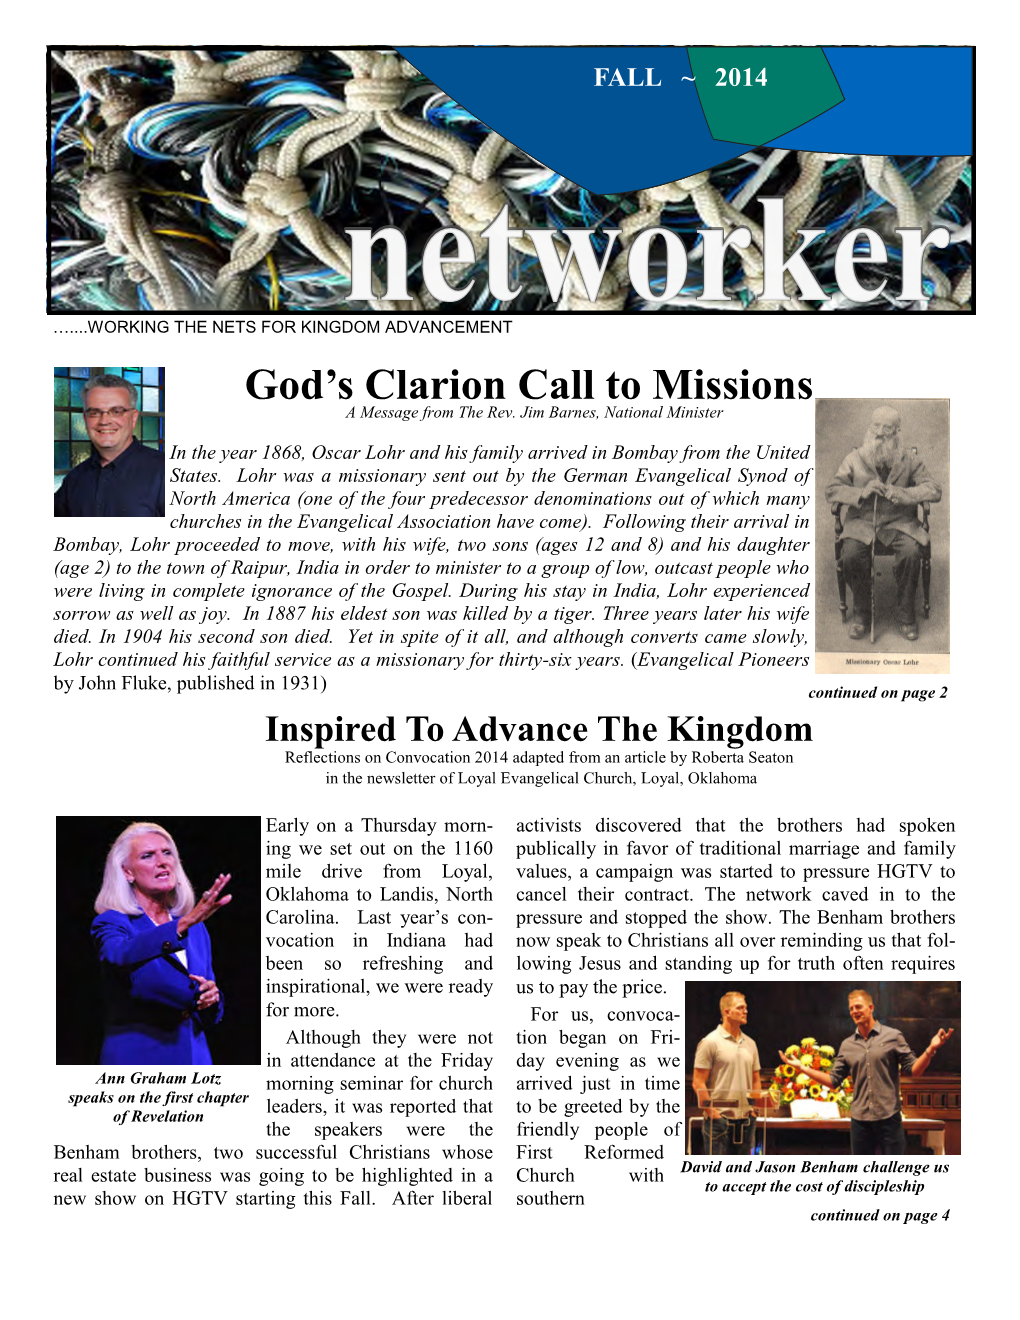 God's Clarion Call to Missions